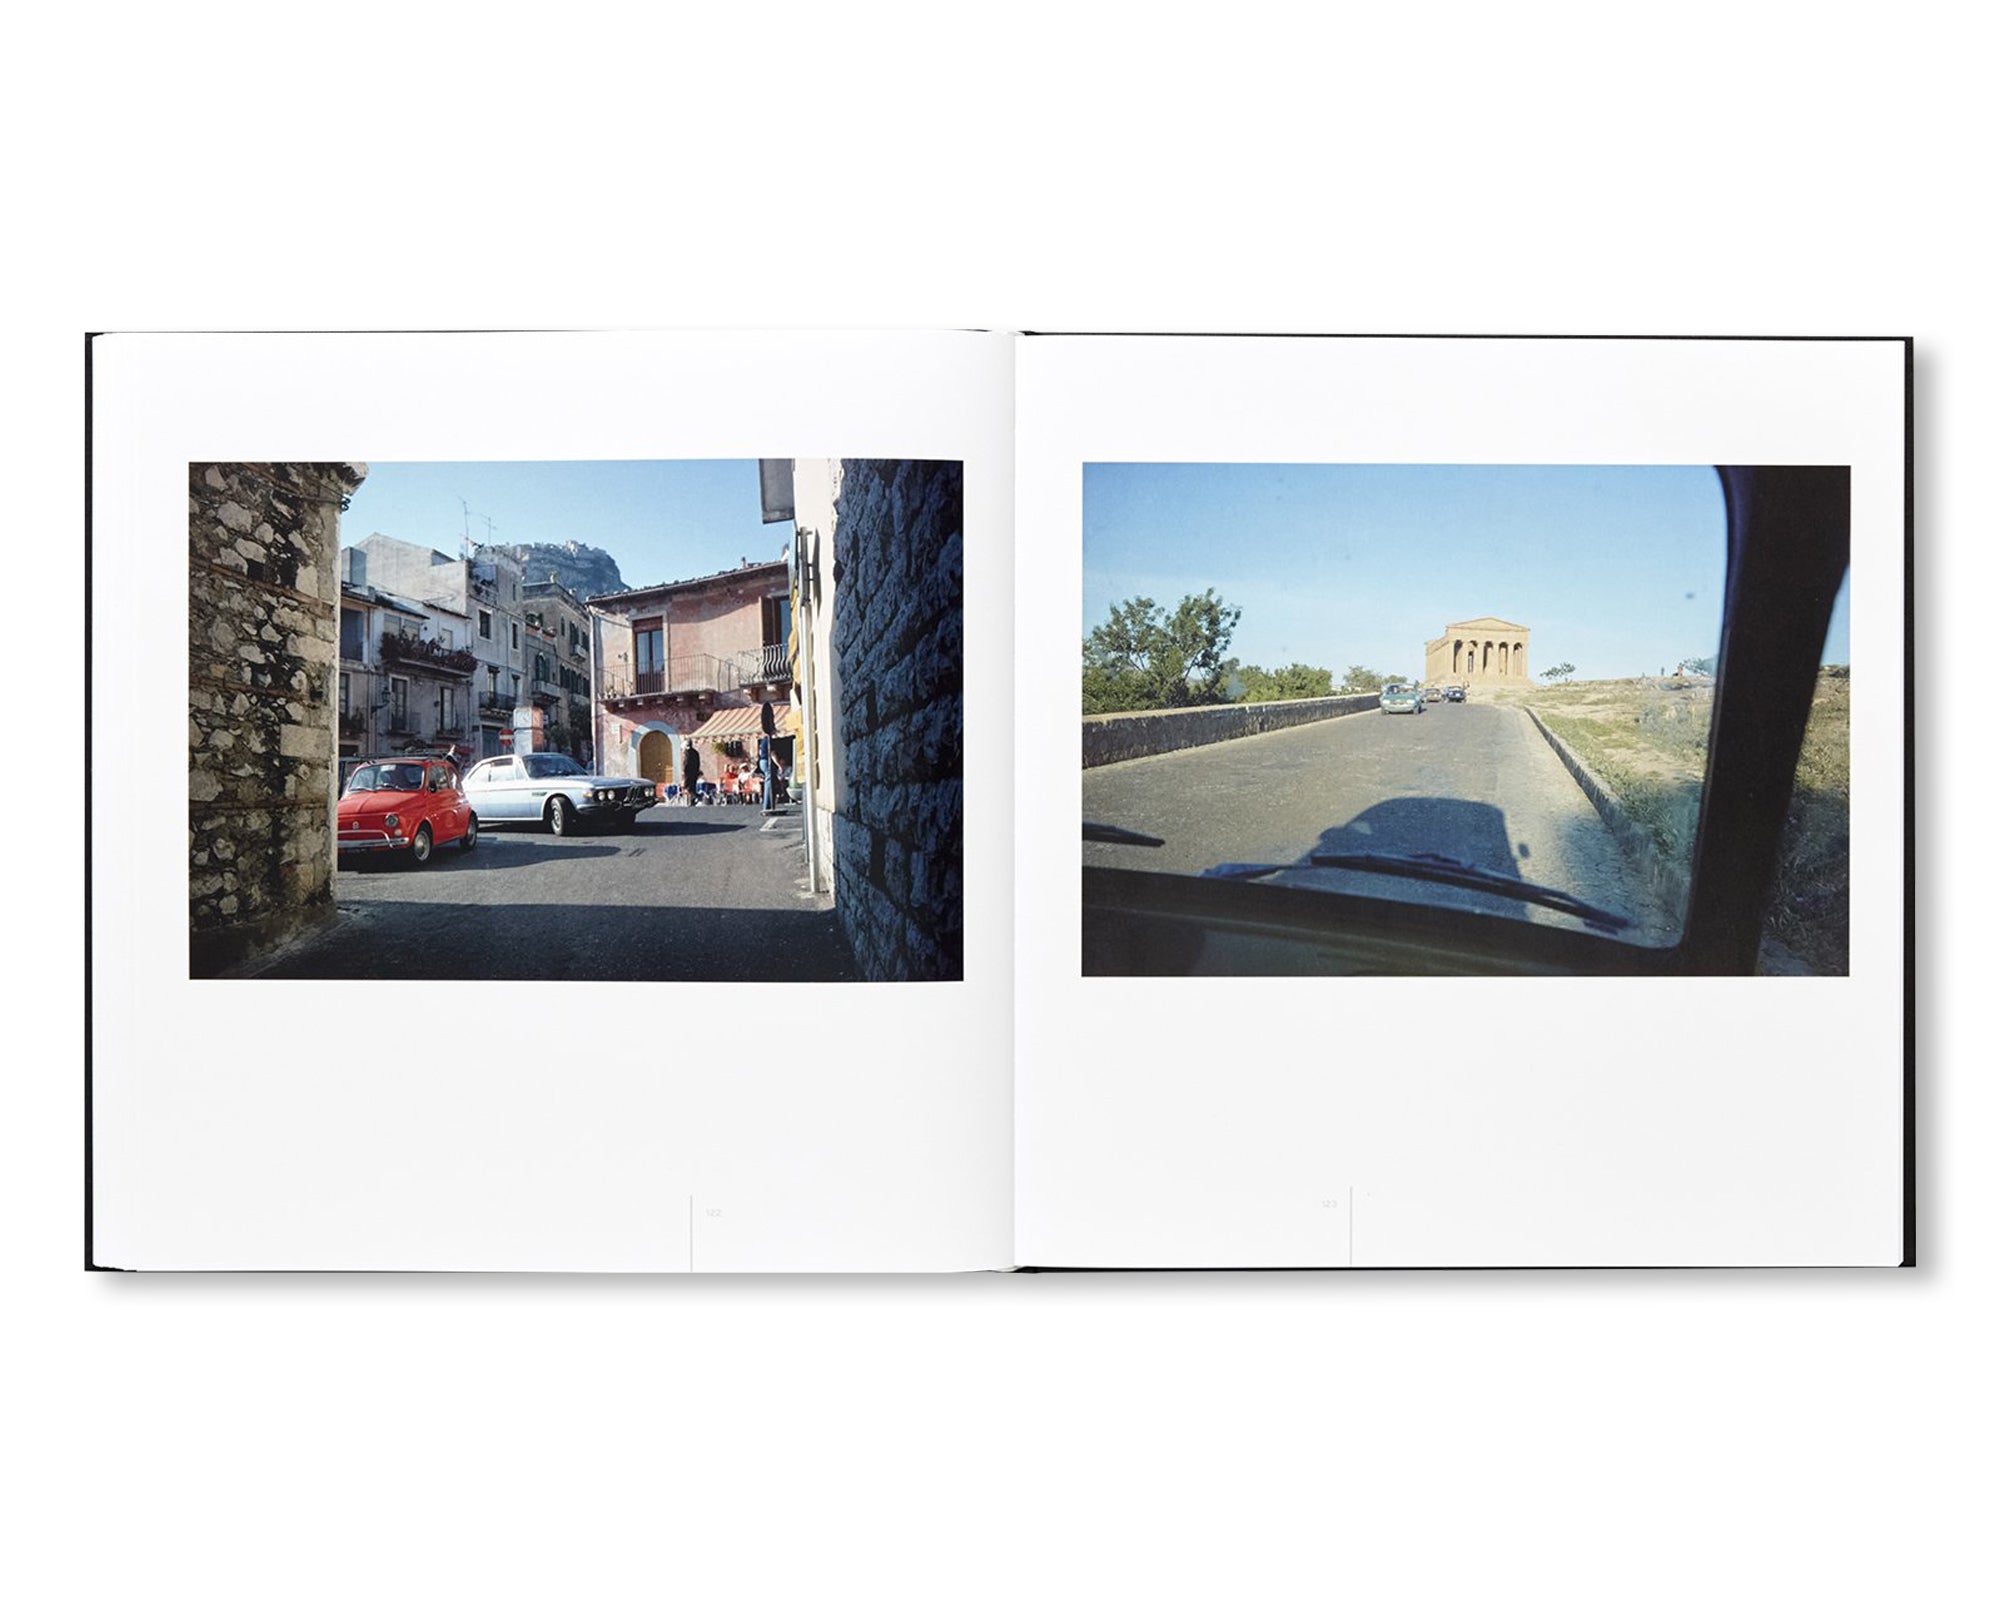 TRANSPARENCIES: SMALL CAMERA WORKS 1971-1979 by Stephen Shore